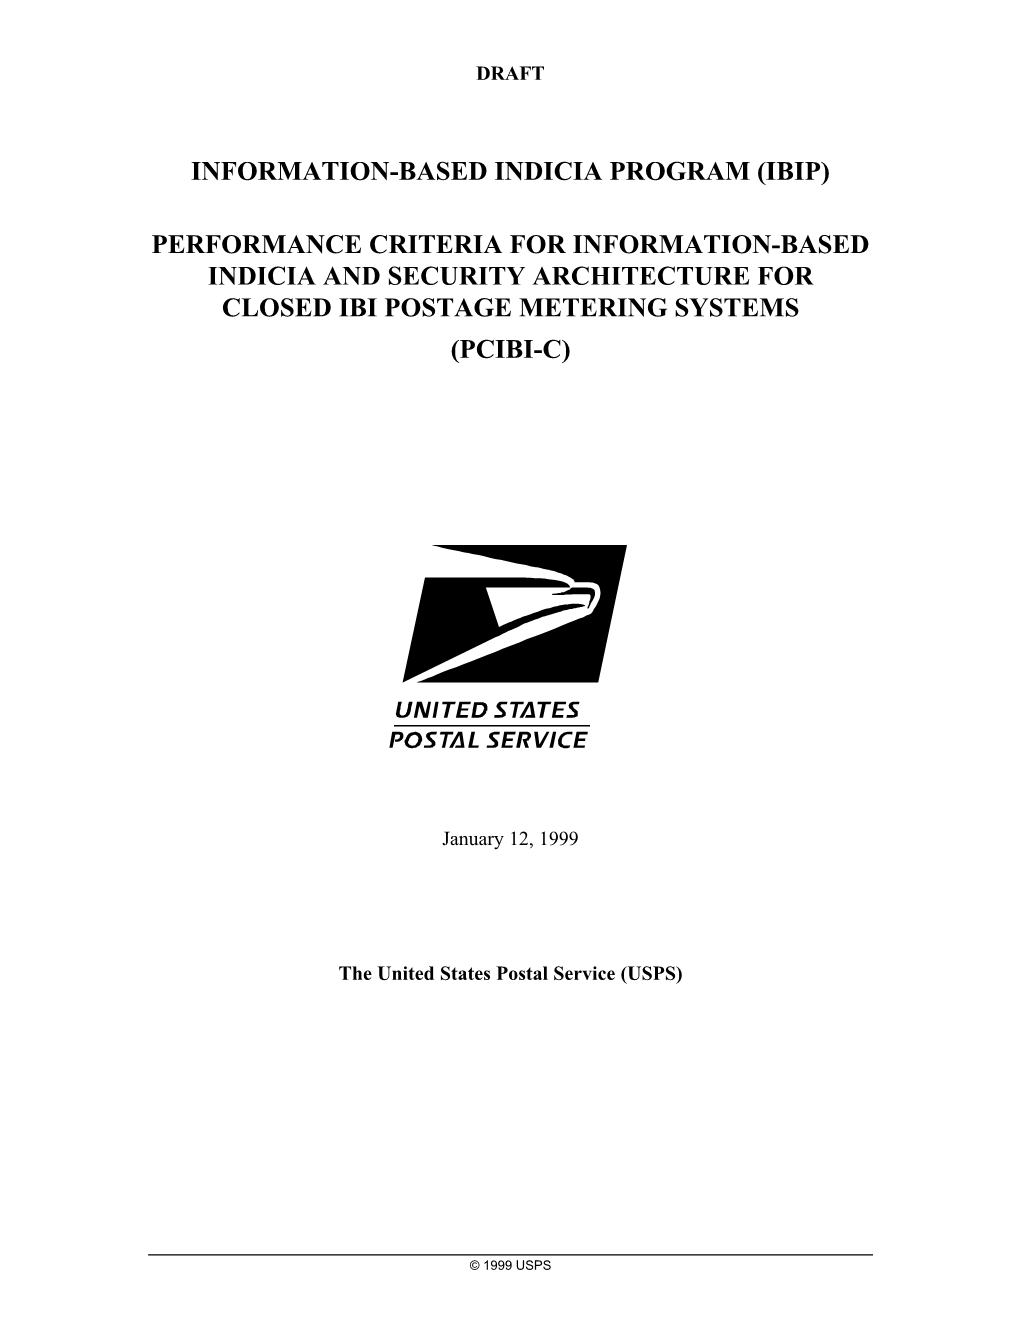 Performance Criteria for Information-Based Indicia and Security Architecture for Closed Ibi Postage Metering Systems